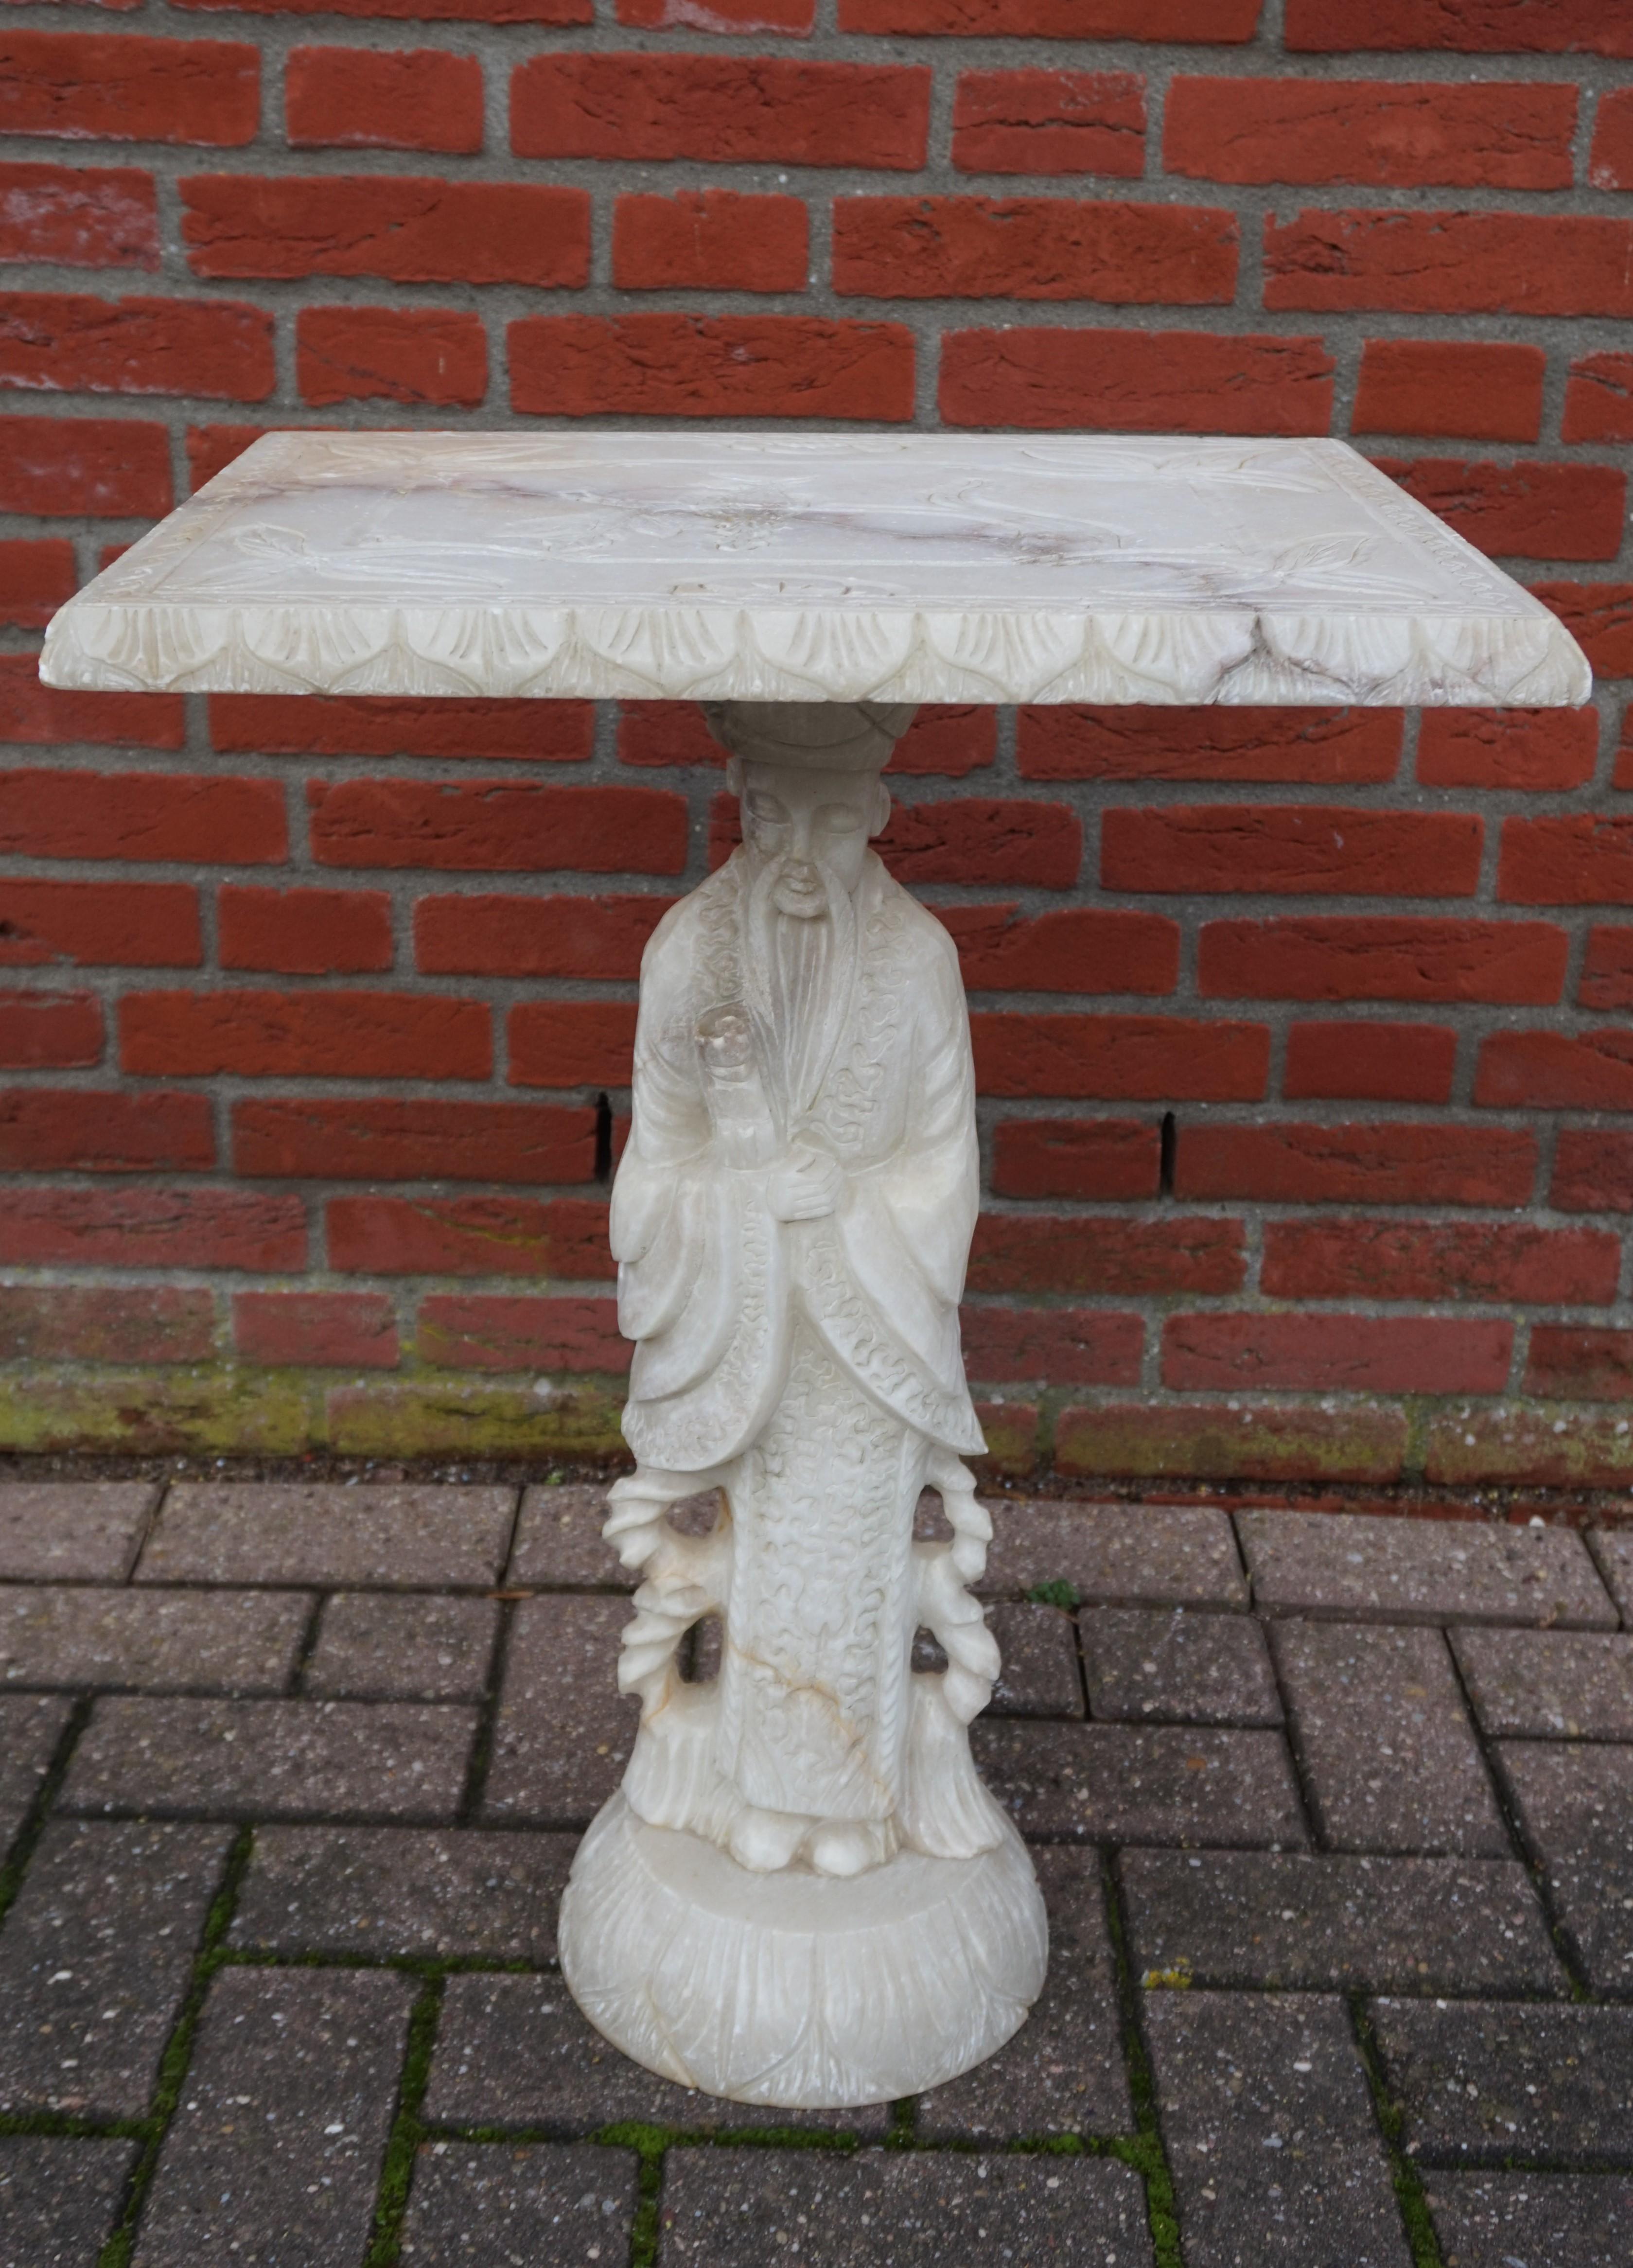 Rare and highly decorative, semi-antique side or end table.

We believe that the Asian philosopher that makes up the base or stem of this table is Confucius, but it could also be Lao Tzu (a.k.a. Laozi). This table is entirely hand carved out of